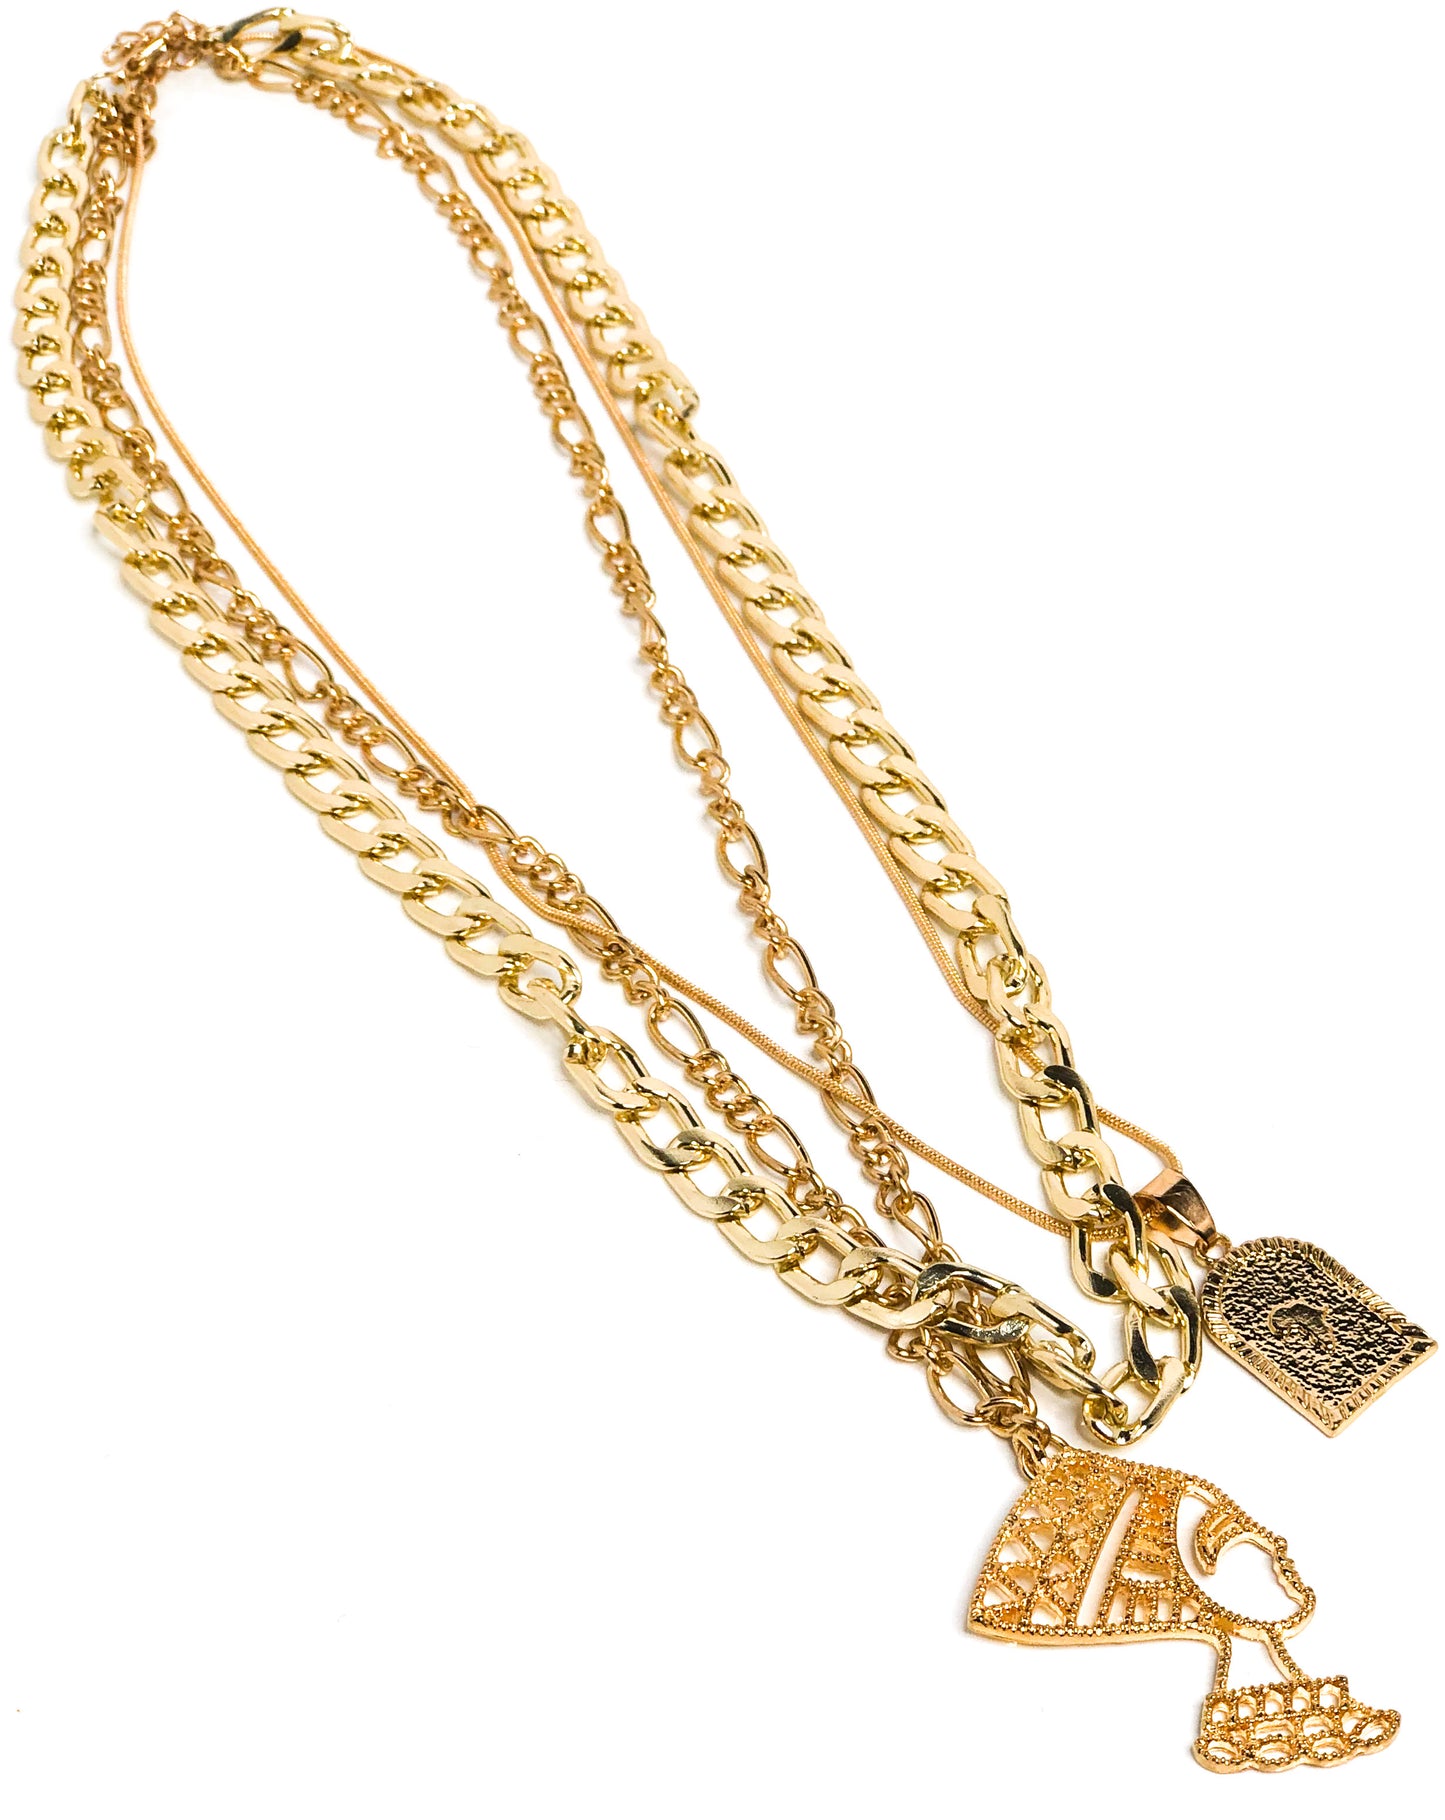 Queen of the Nile Necklace